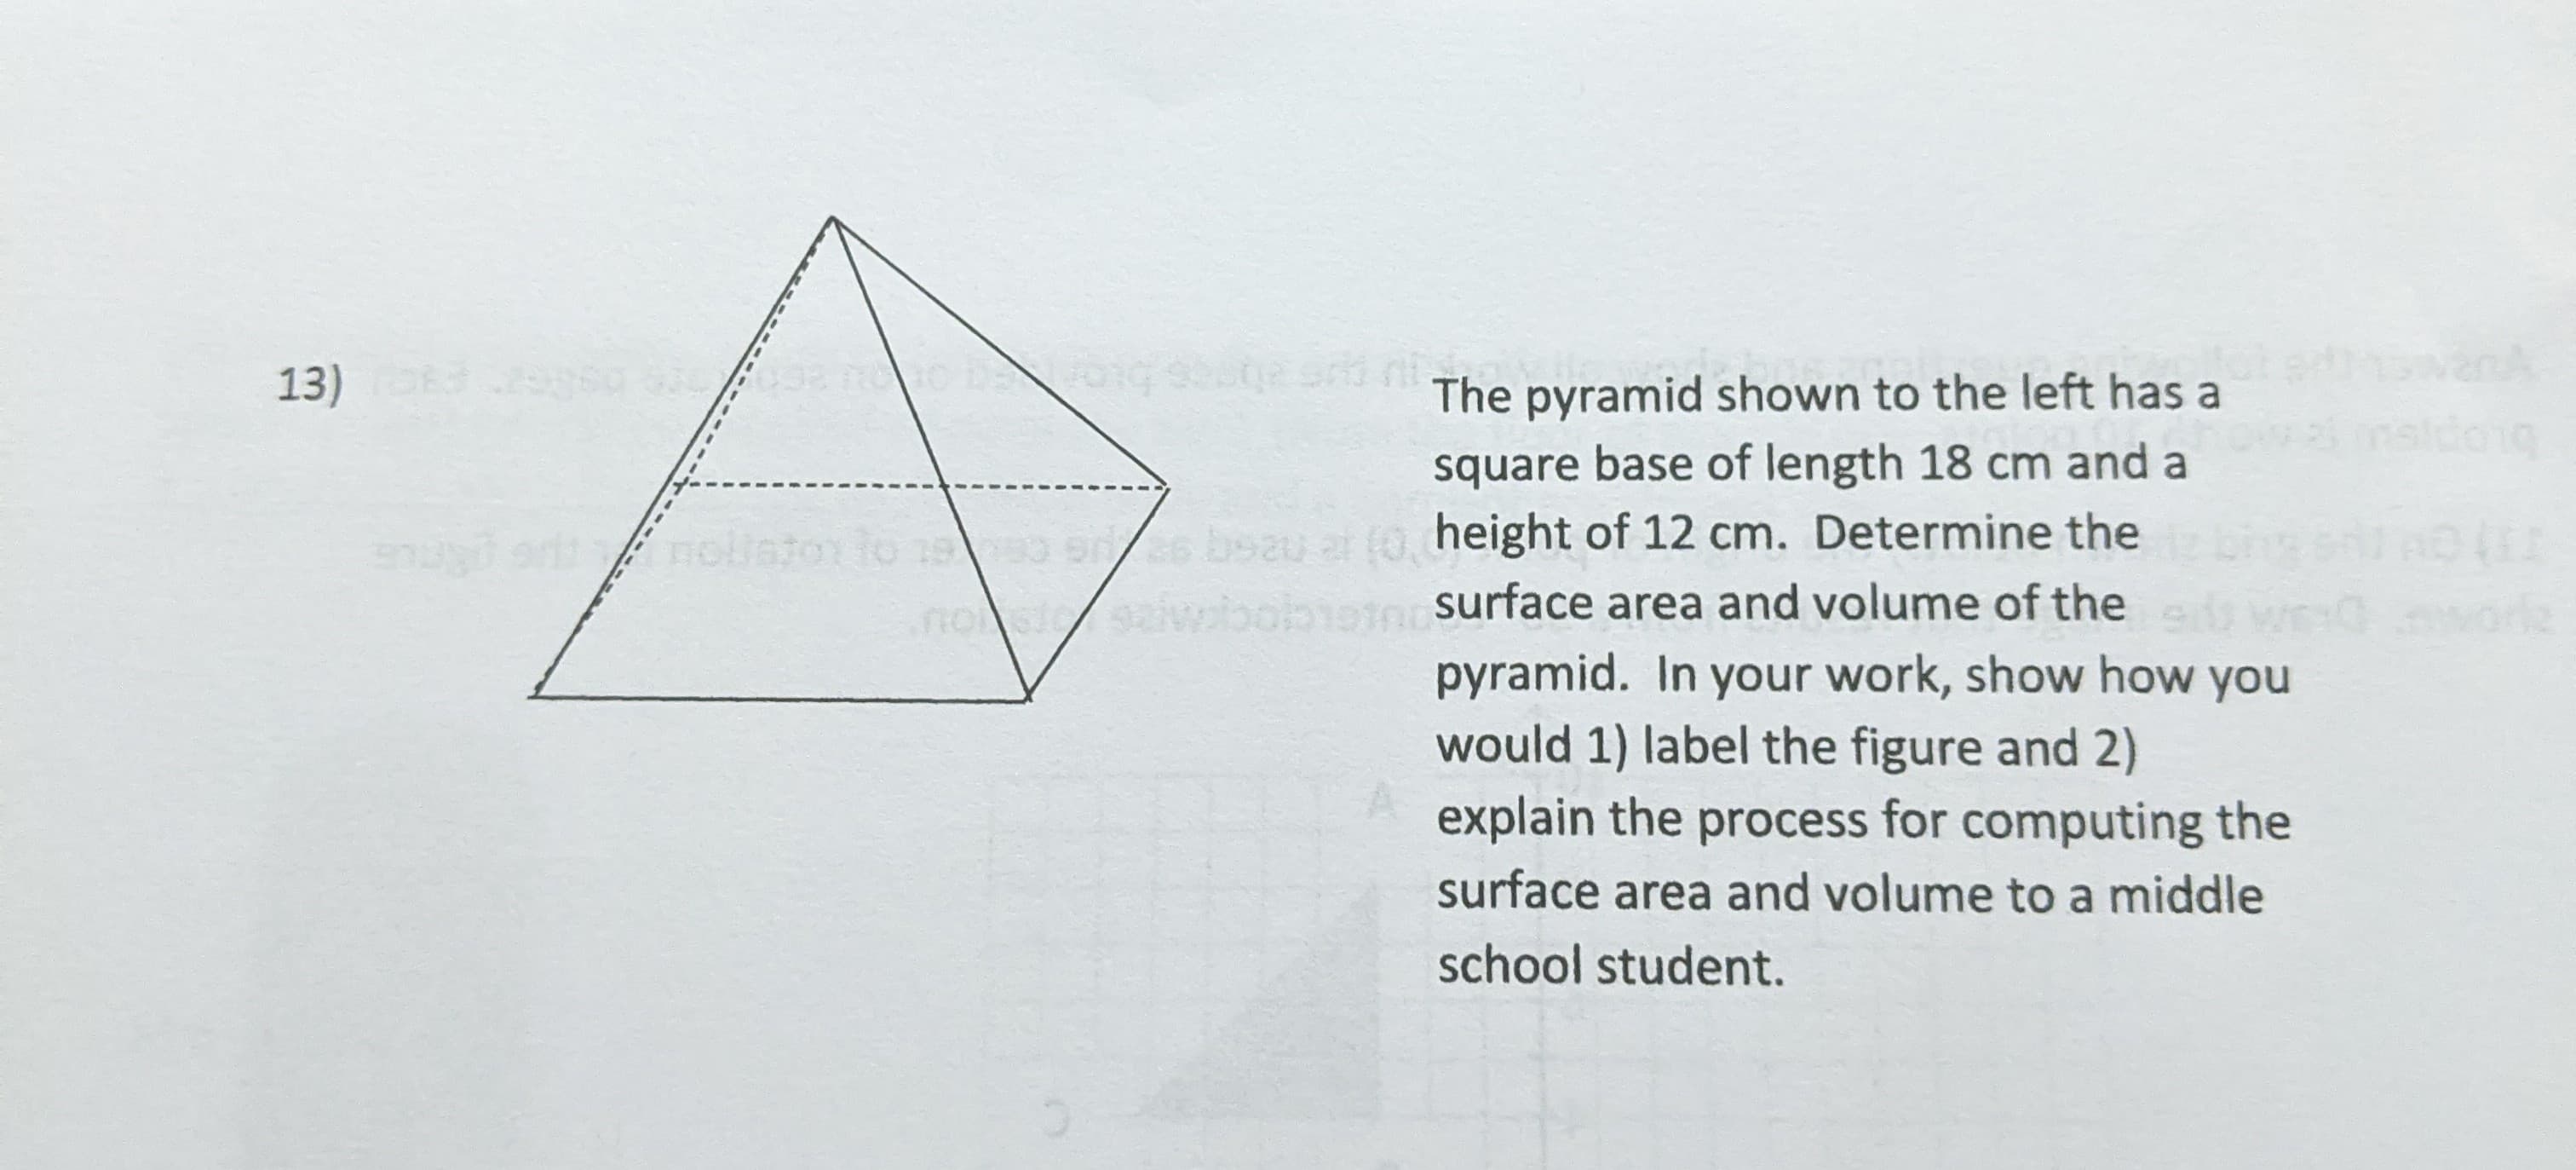 13)
The pyramid shown to the left has a
square base of length 18 cm and a
0 ss bsau ar (0, height of 12 cm. Determine the
nossaiwbobiotn surface area and volume of the
pyramid. In your work, show how you
would 1) label the figure and 2)
explain the process for computing the
surface area and volume to a middle
school student.
